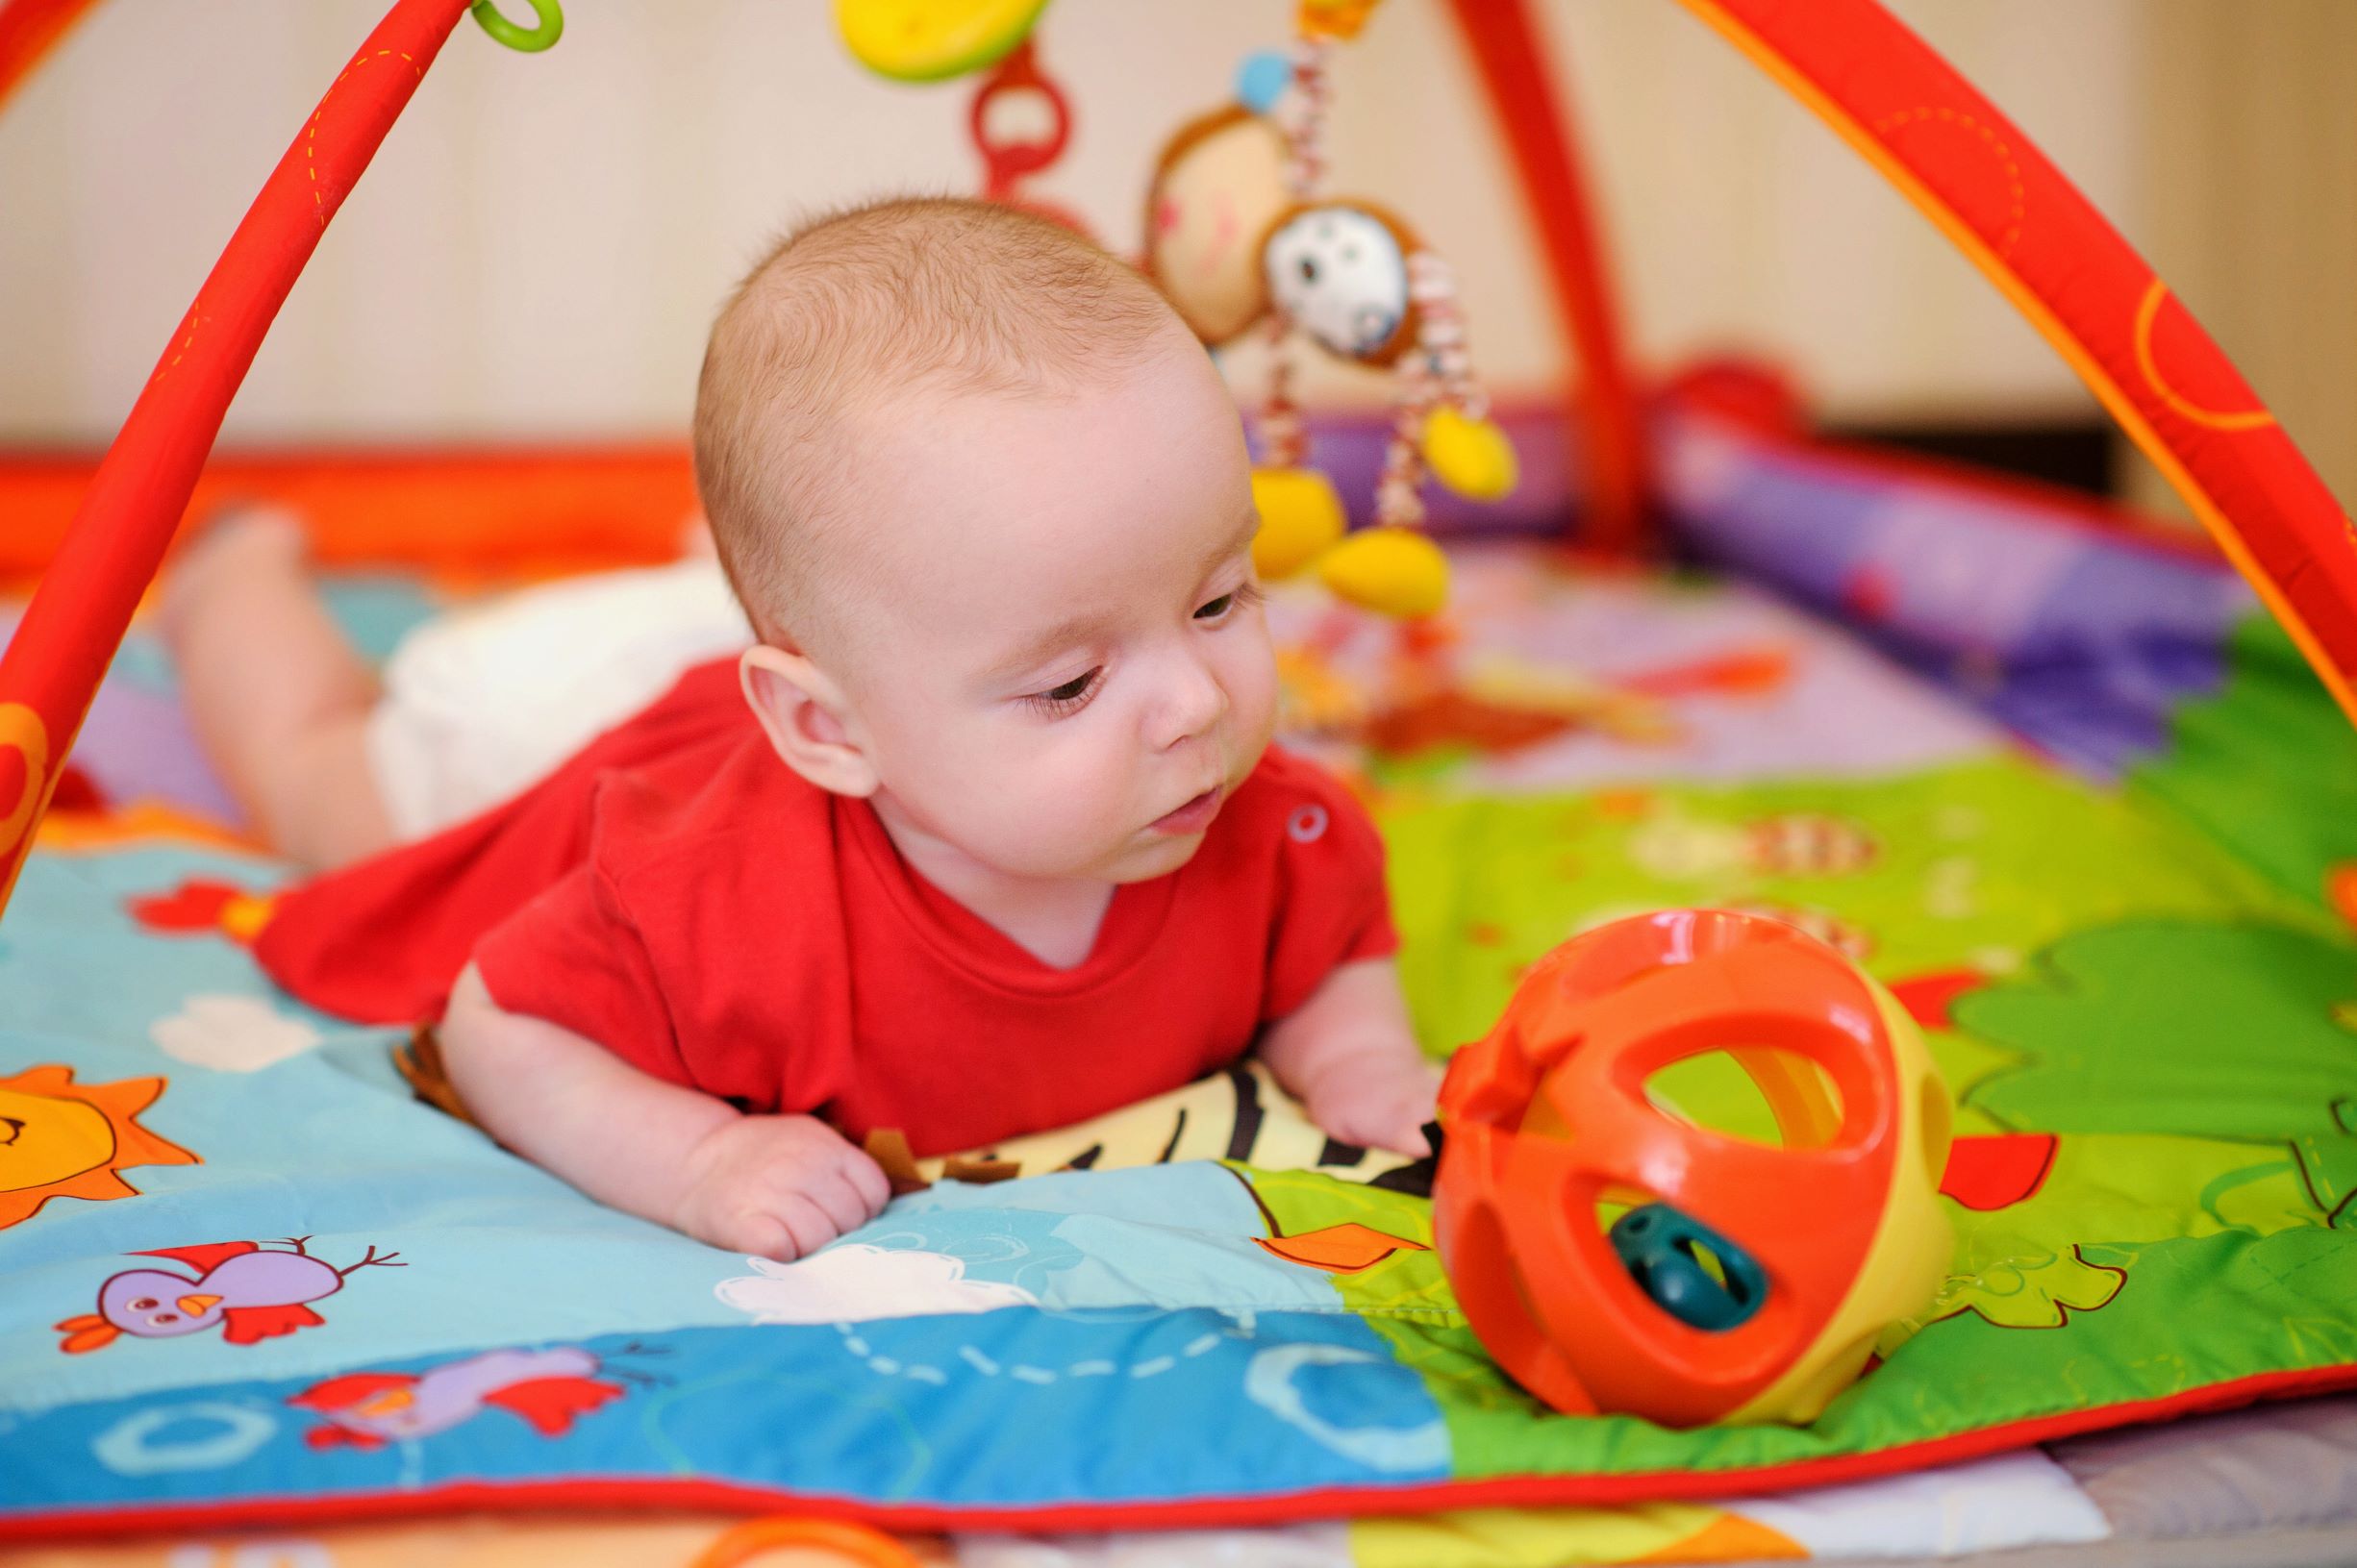 Your Guide to Tummy Time